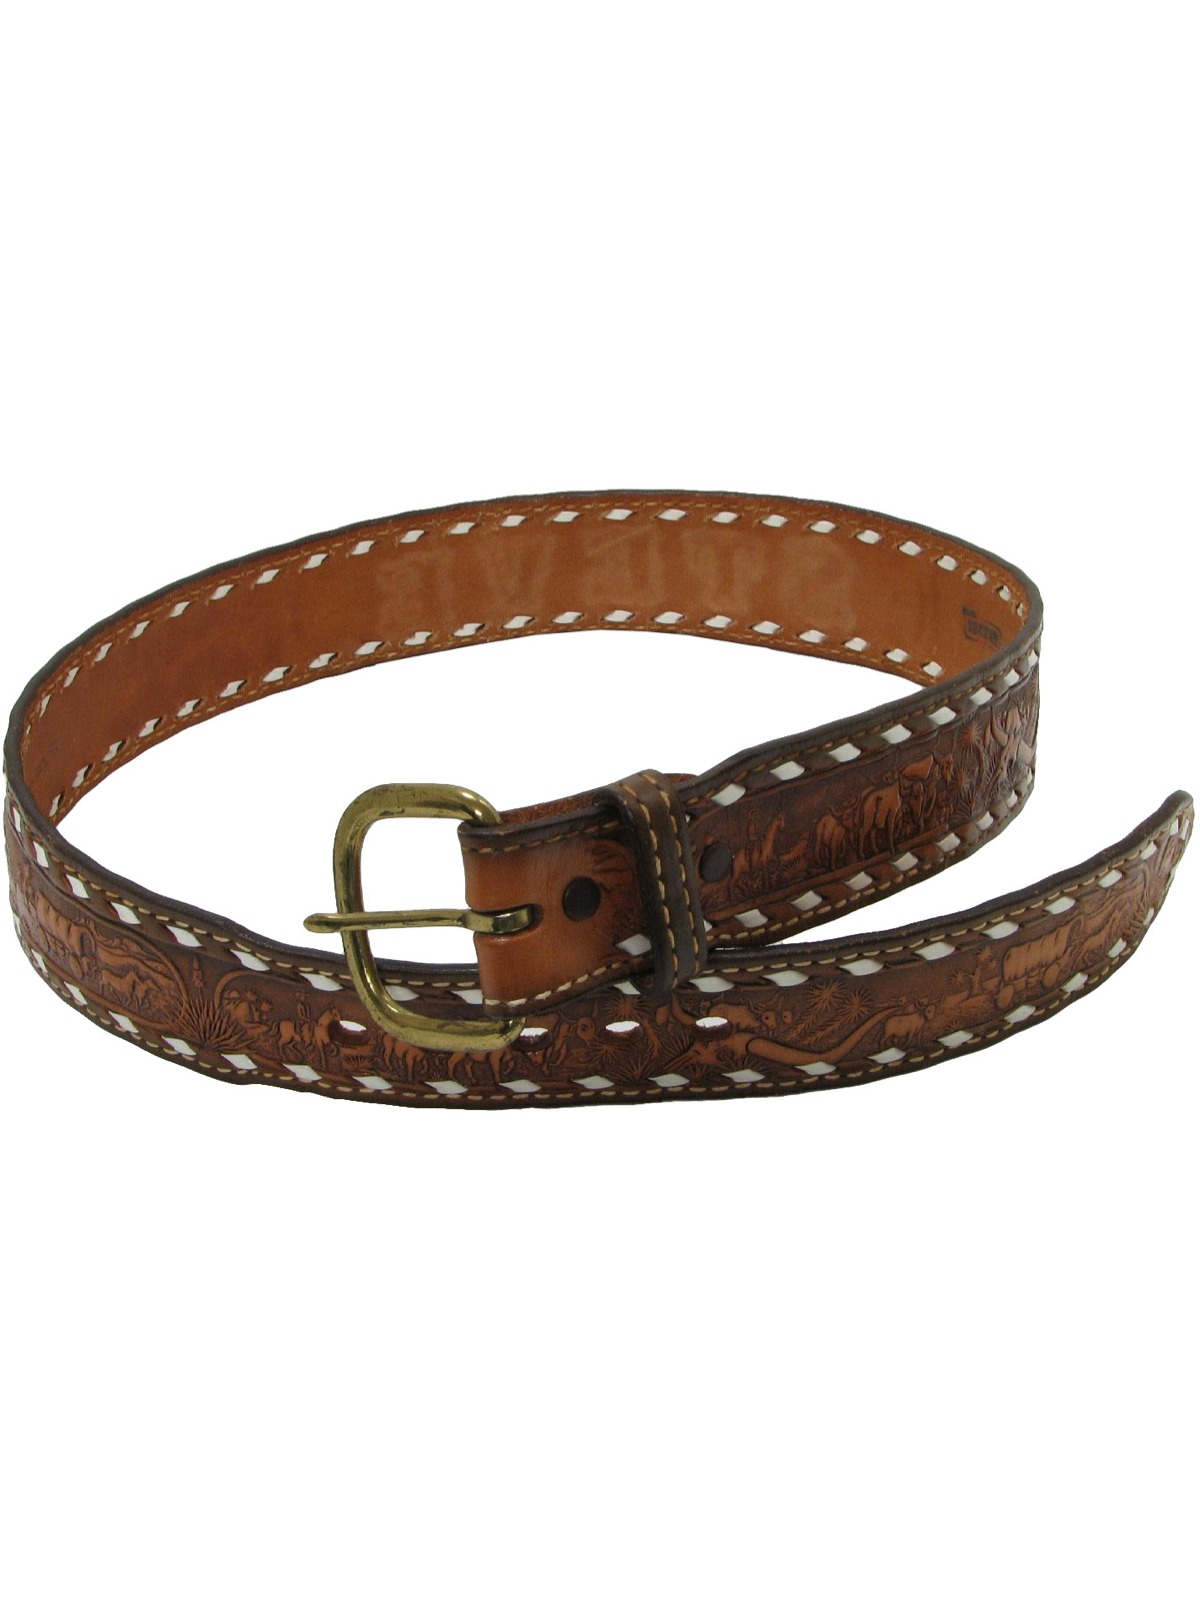 Retro 70s Belt (Texan) : 70s -Texan- Mens shaded brown leather western ...